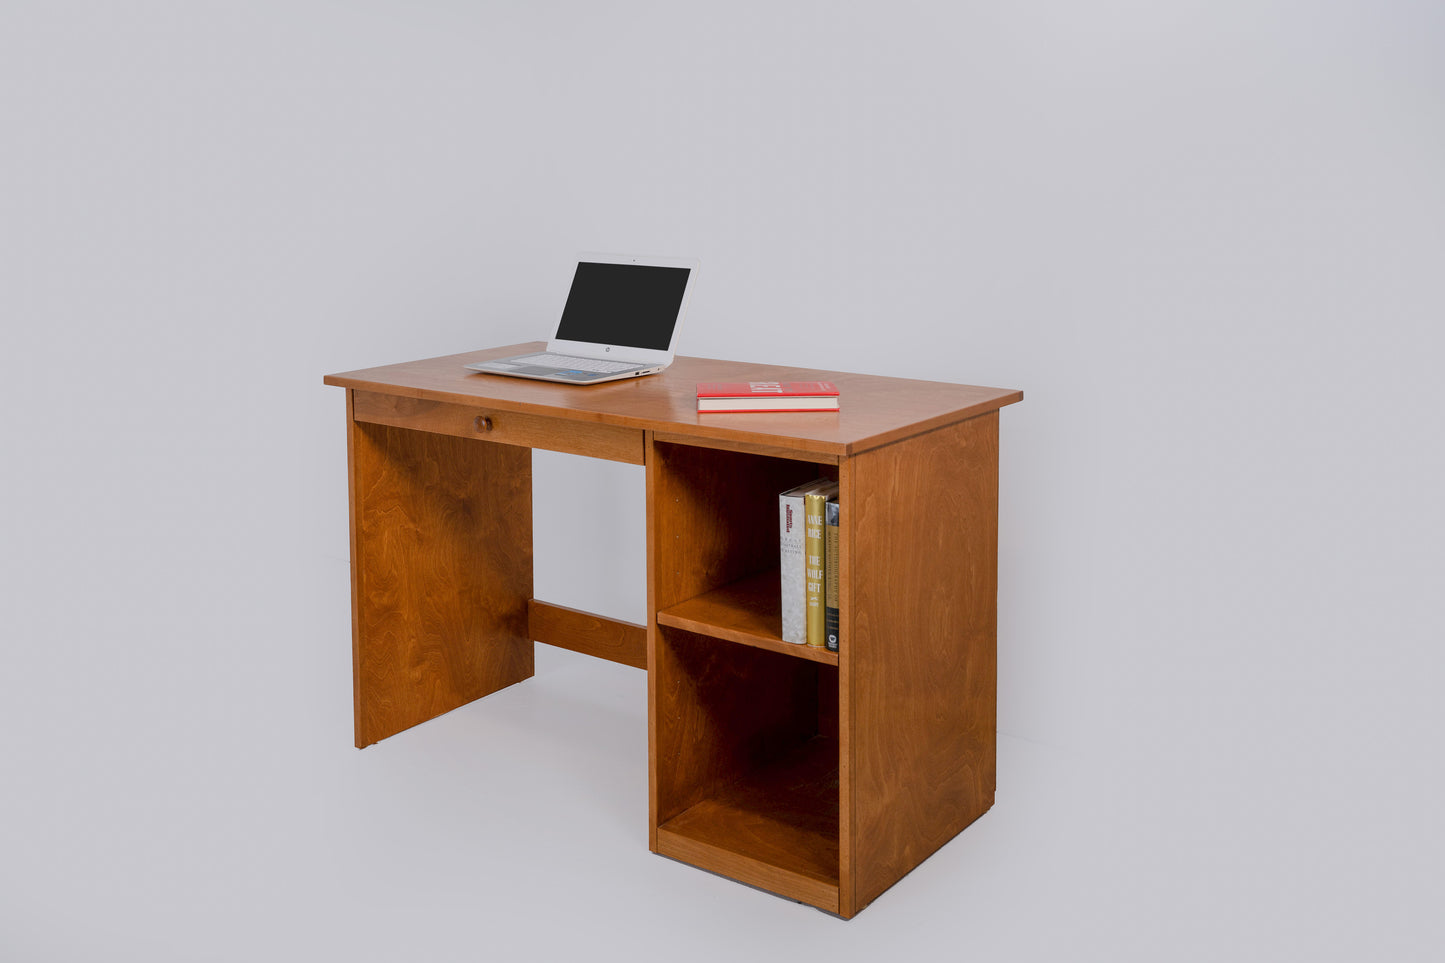 Berkshire Student Desk shown in meadow oak finish, featuring hardwood birch construction and adjustable shelving. 